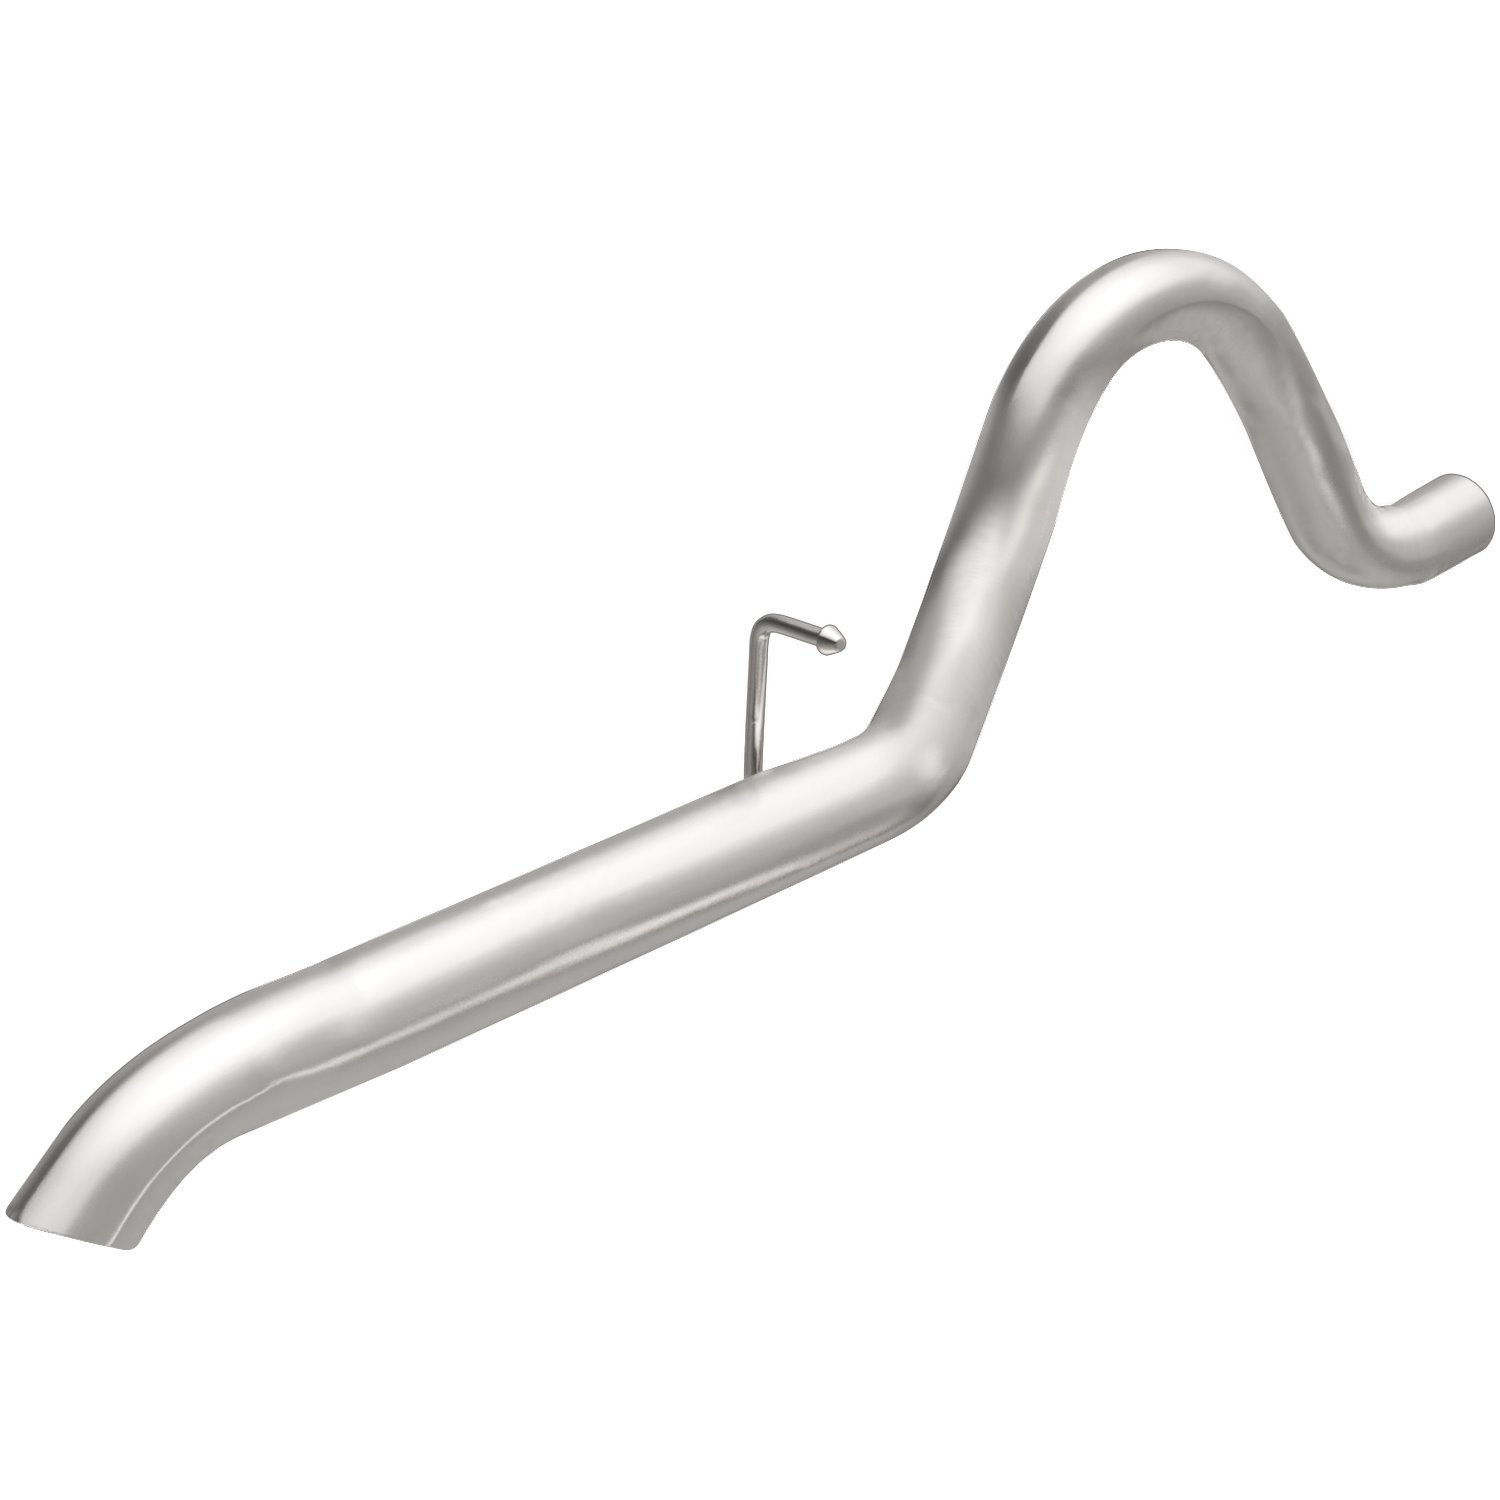 Direct-Fit Exhaust Tail Pipe, 2000-2003 Dodge Durango 4.7L